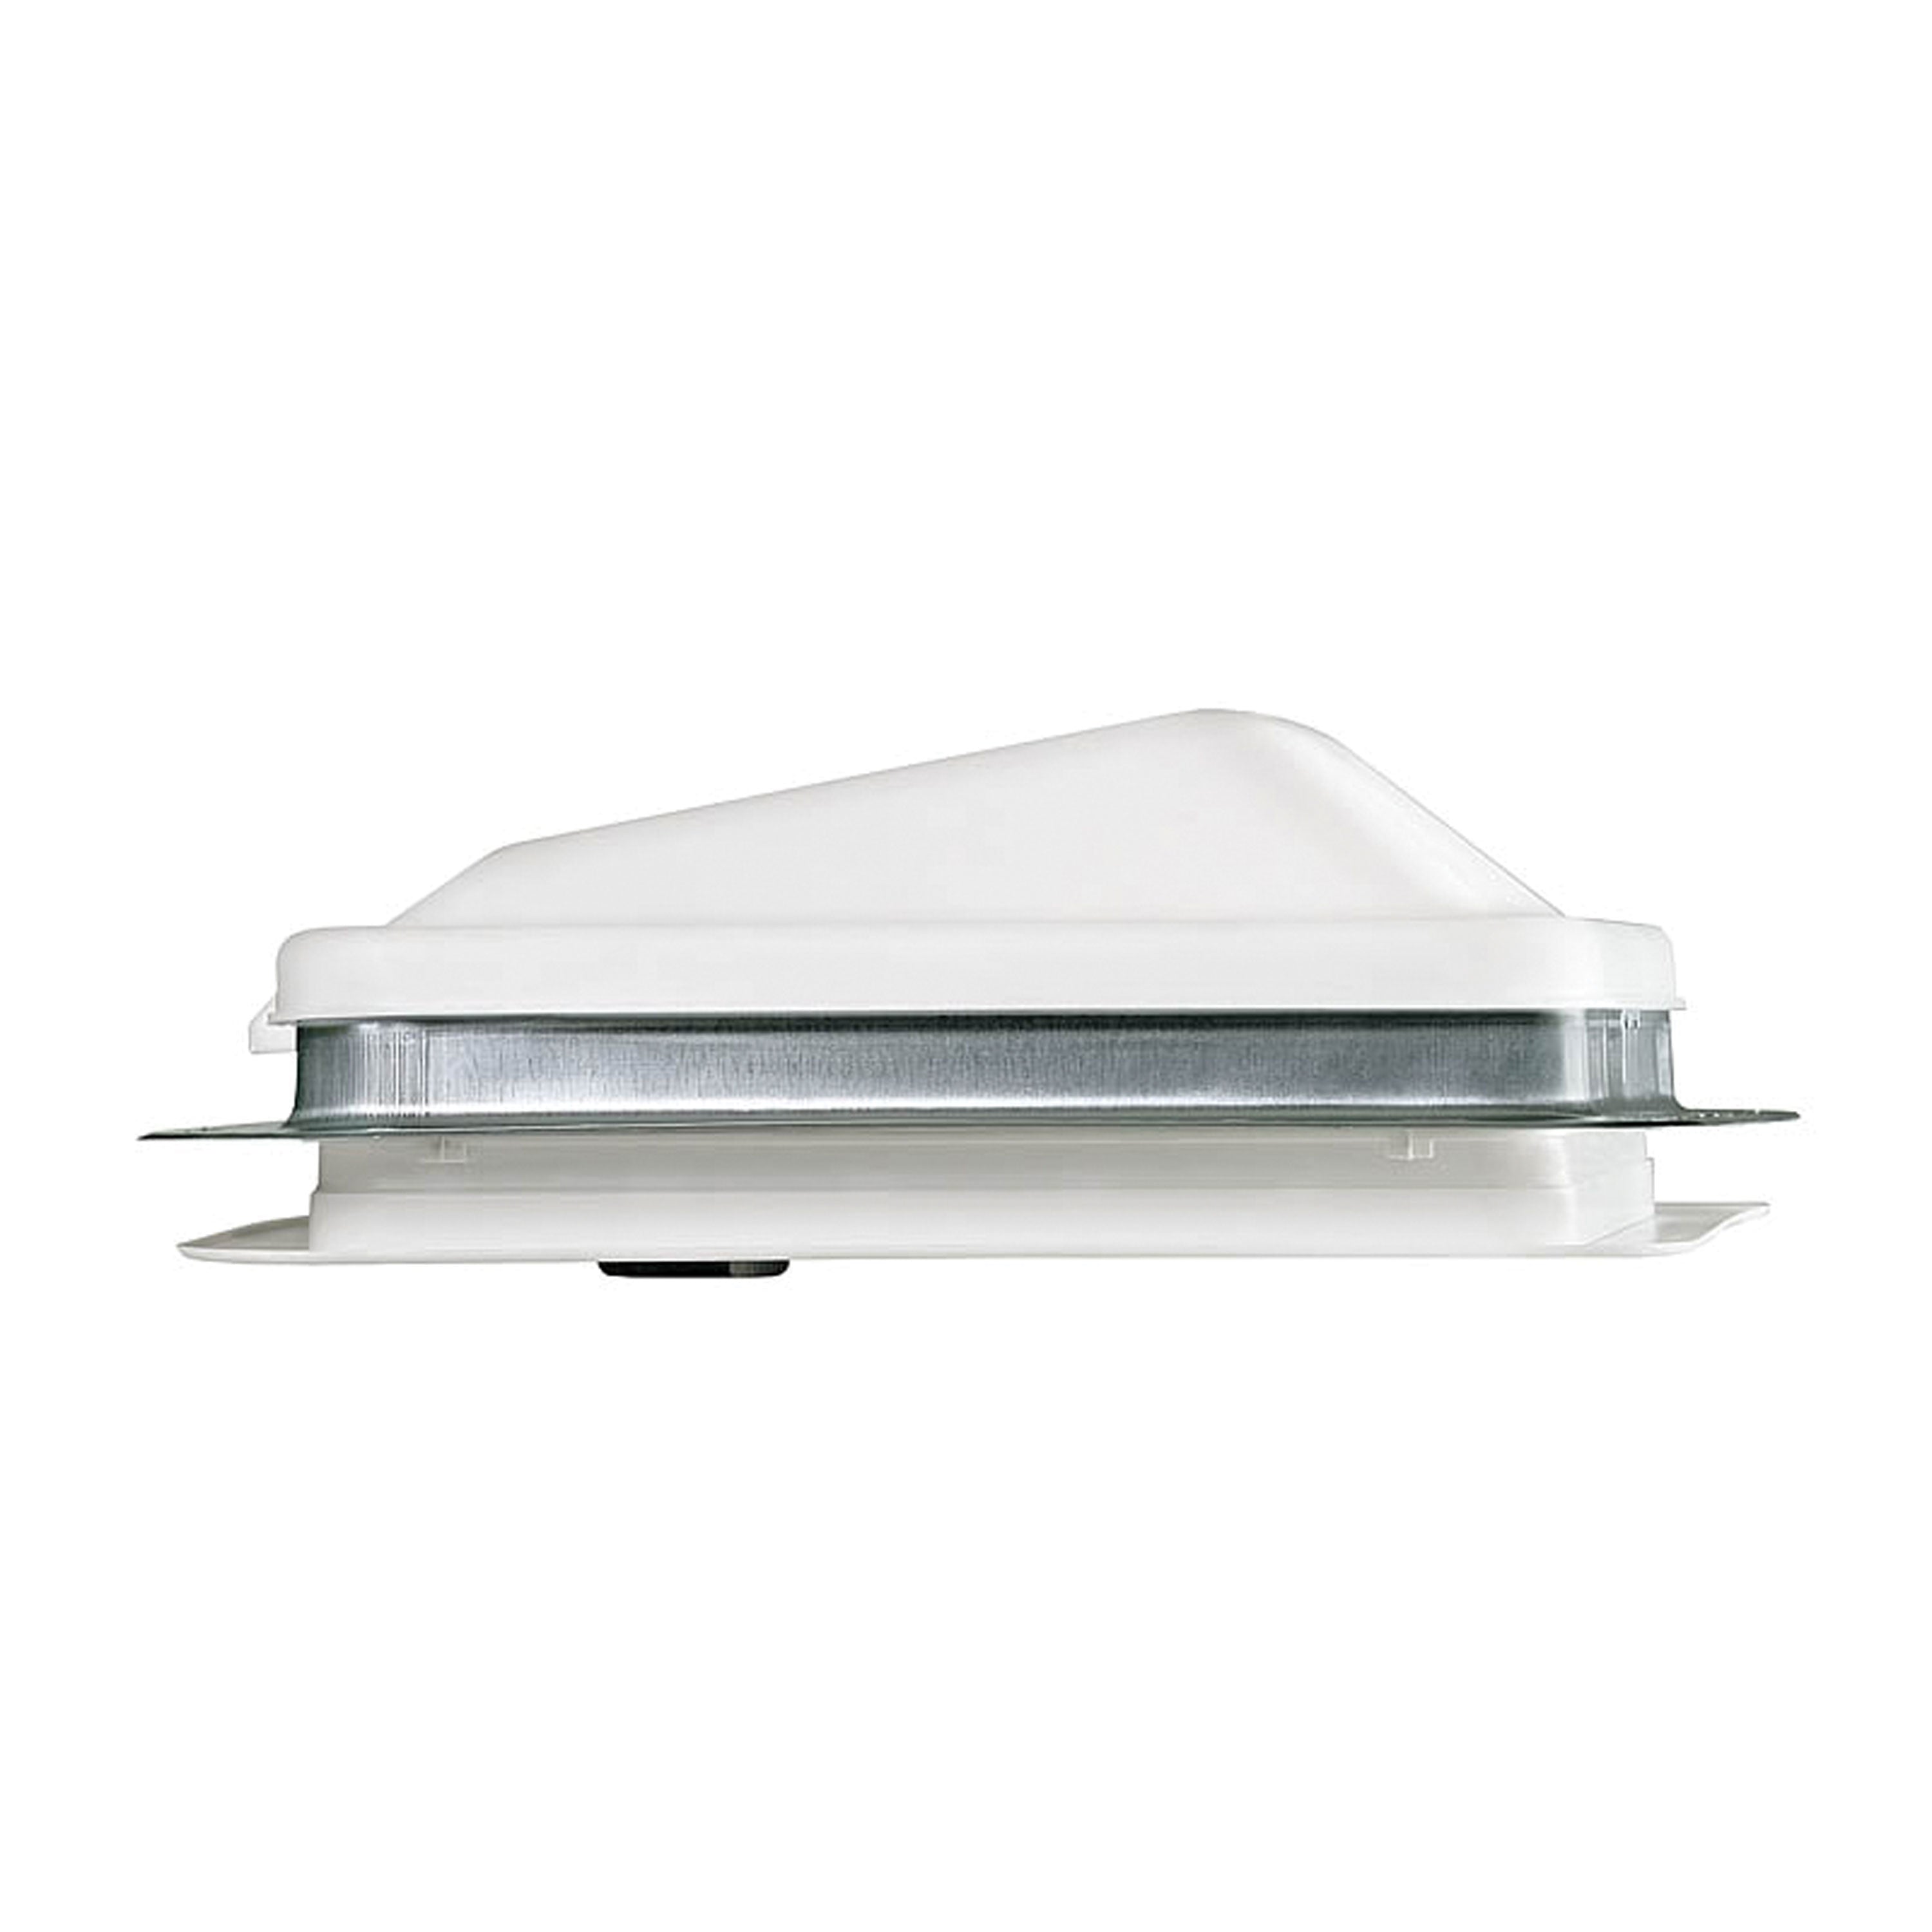 Ventline BV0554-01 Vent Cover 14" x 14" for Old Style Round Dome RV Roof Vents - White